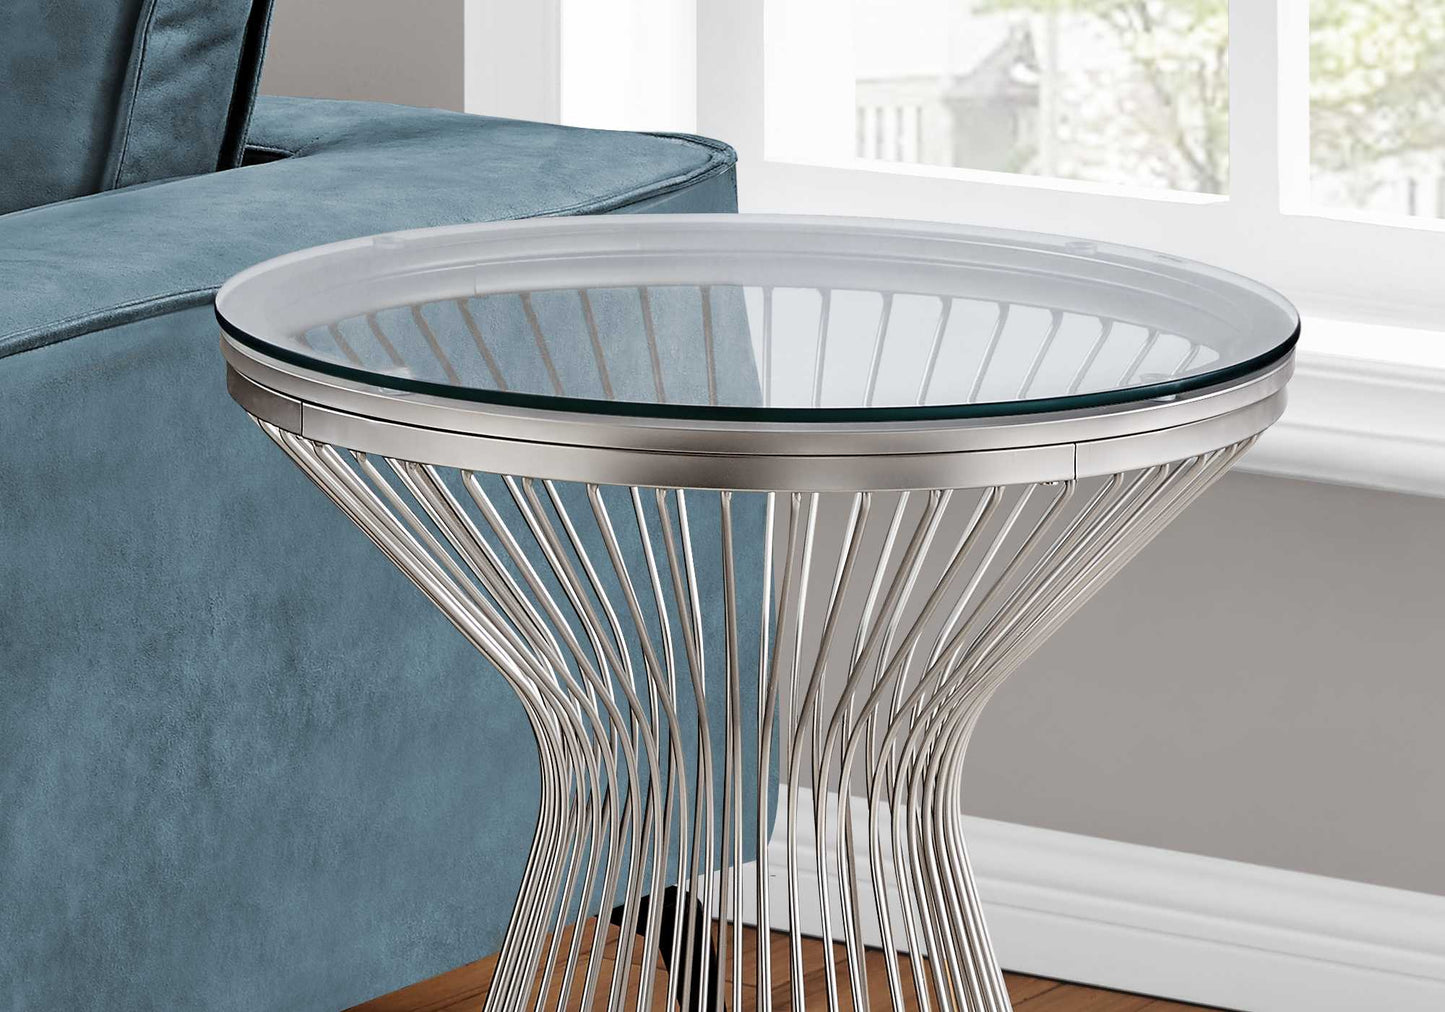 25" Silver And Clear Glass Round End Table